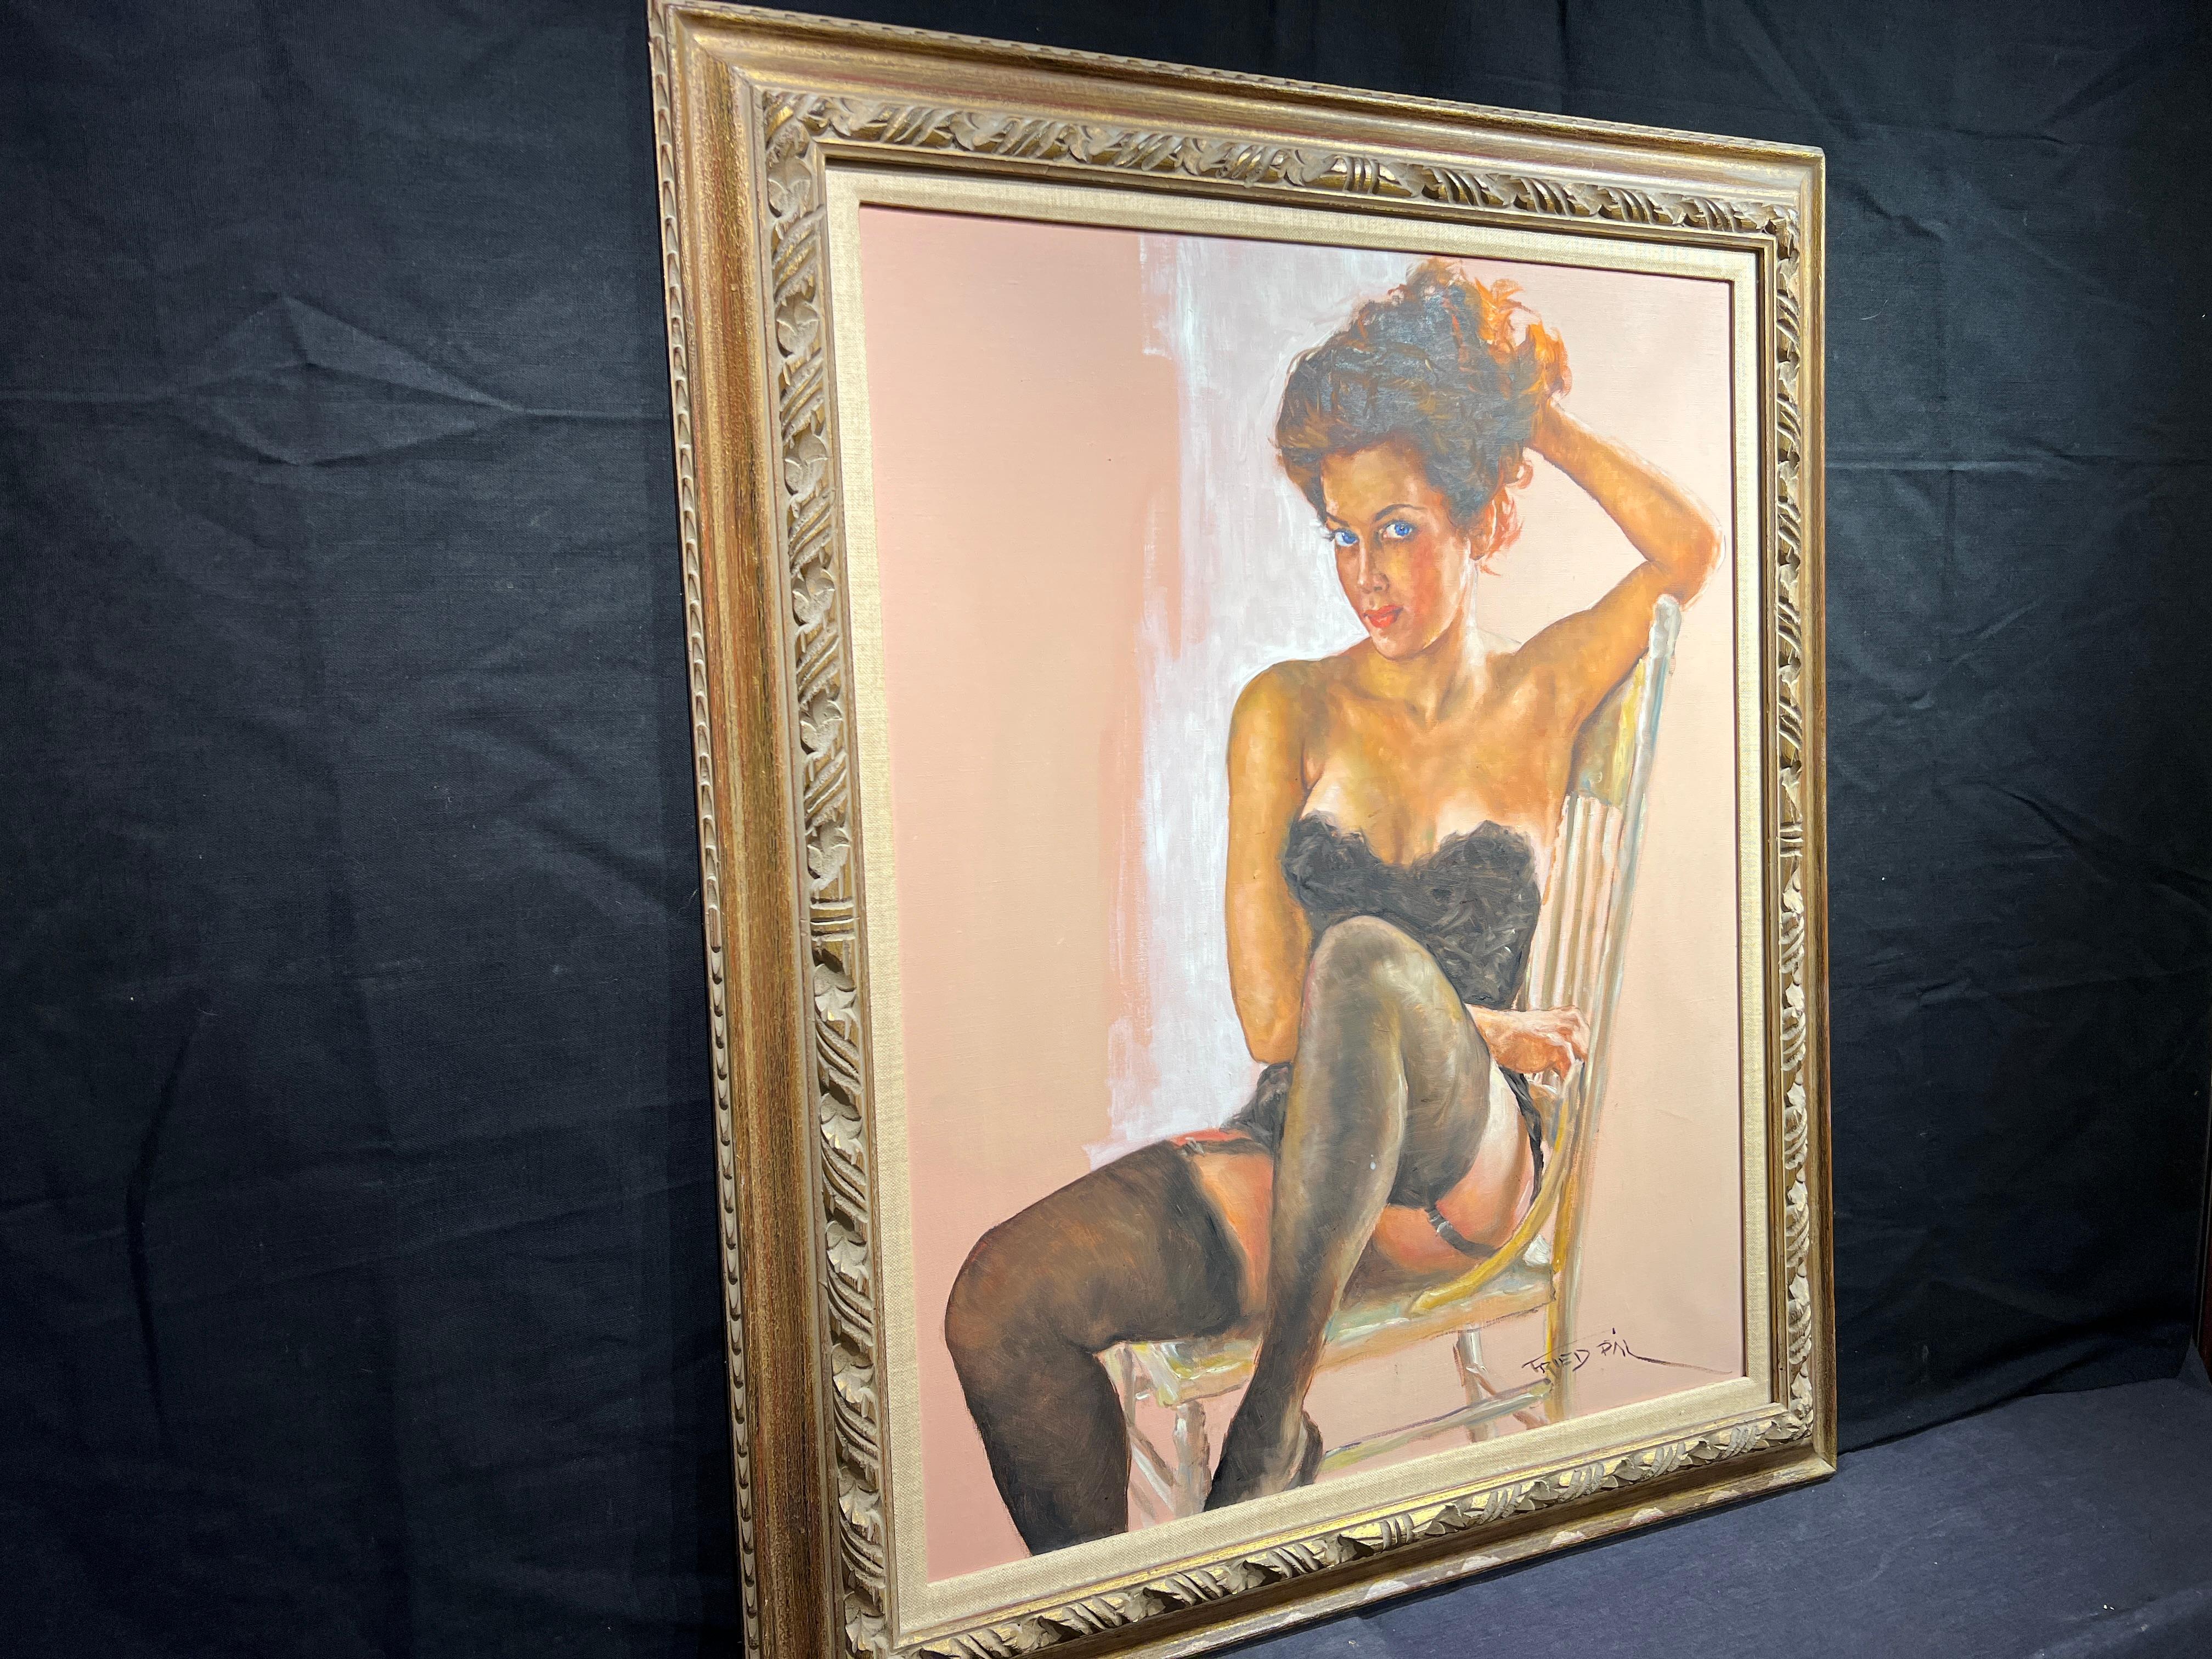 Pin Up Girl
By Pal Fried (Hungarian, American, 1893-1976)
Signed Lower Right
Unframed: 30